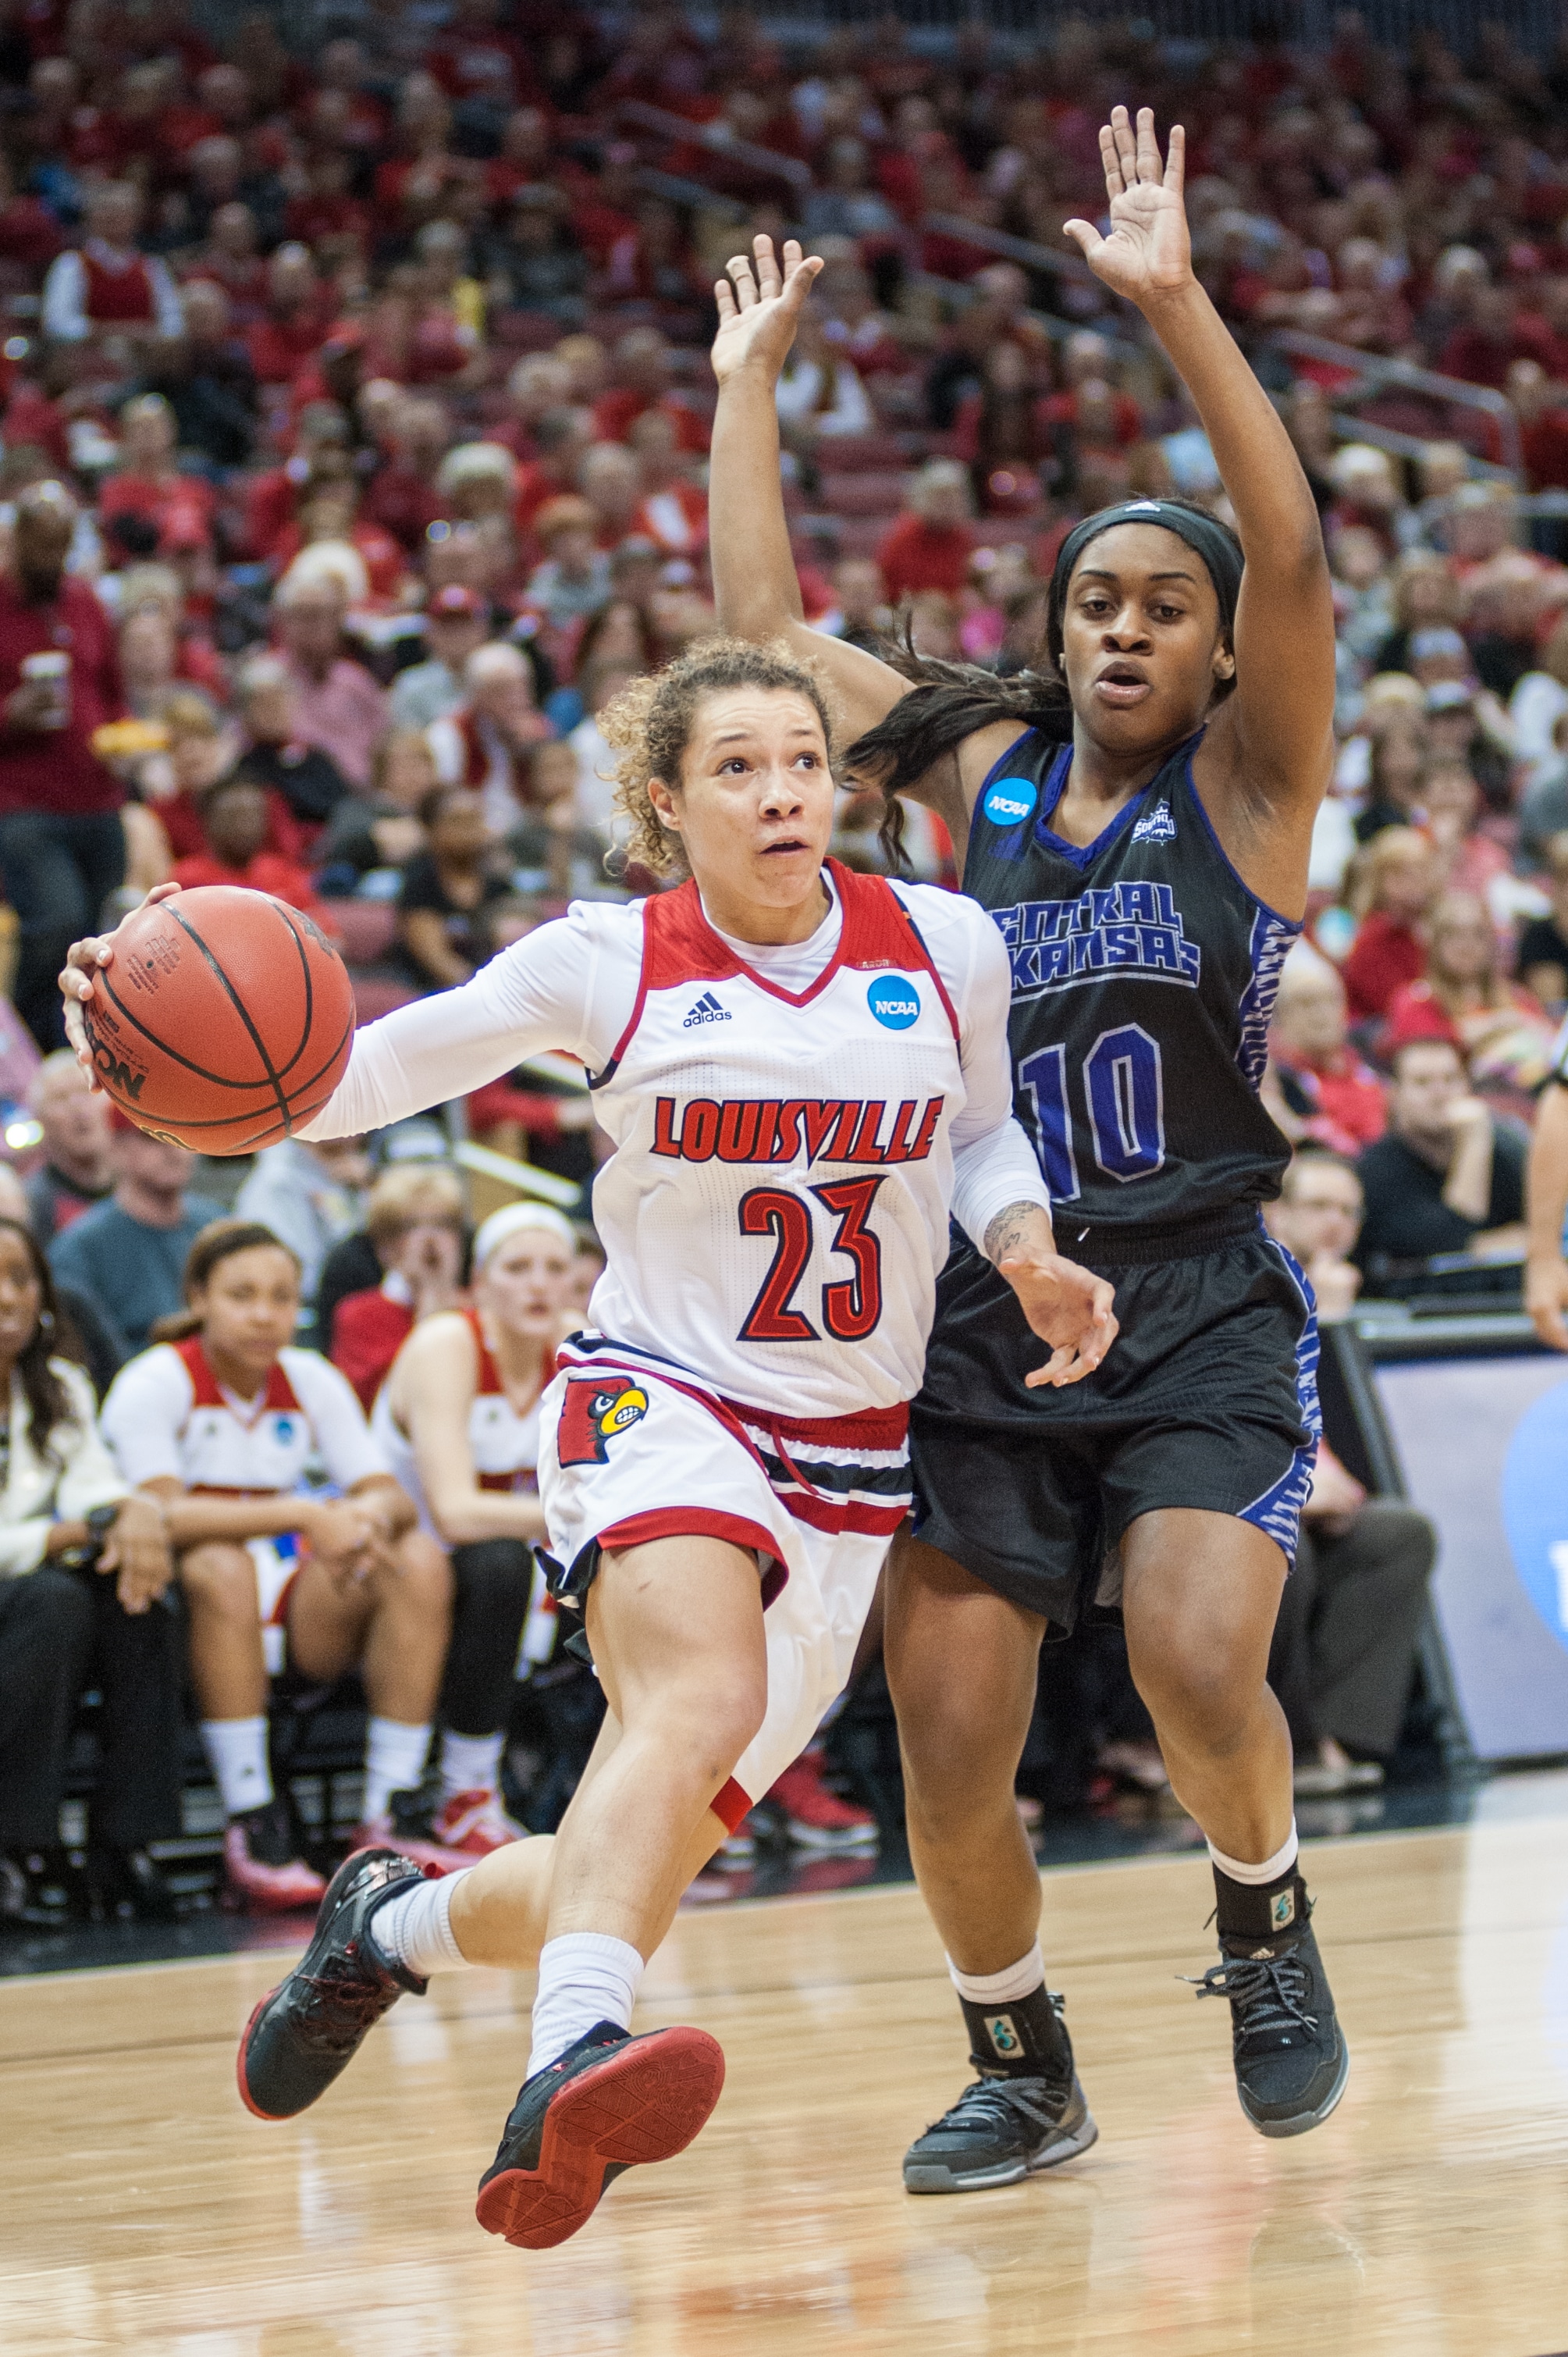 Women's basketball dominates in first round of NCAA tournament • The Louisville Cardinal